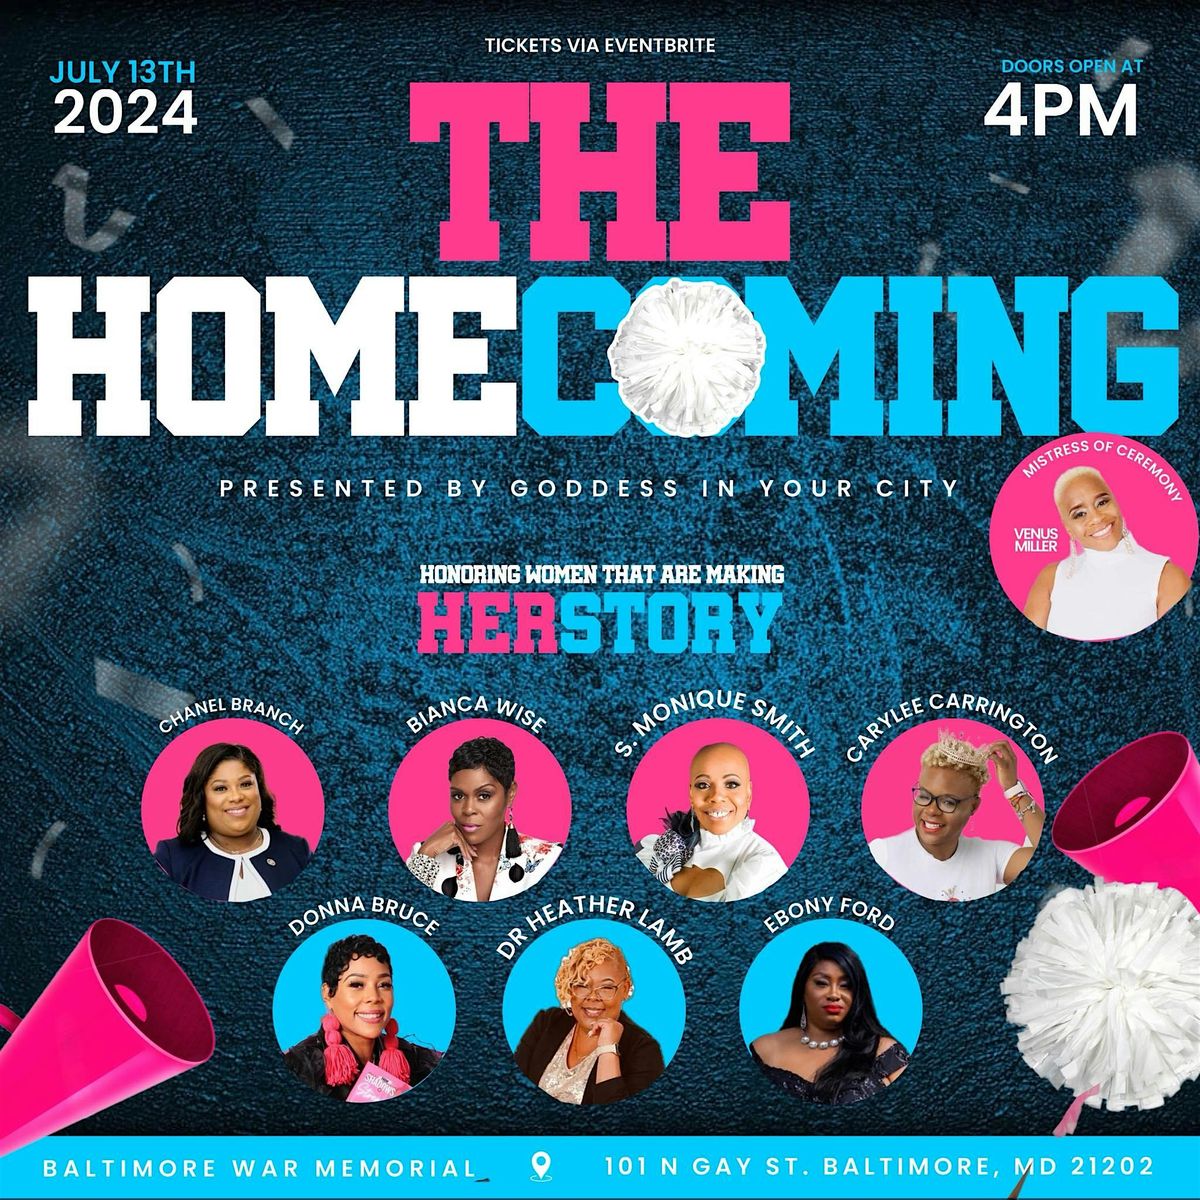 Goddess In Your City DMV "The HomeComing"